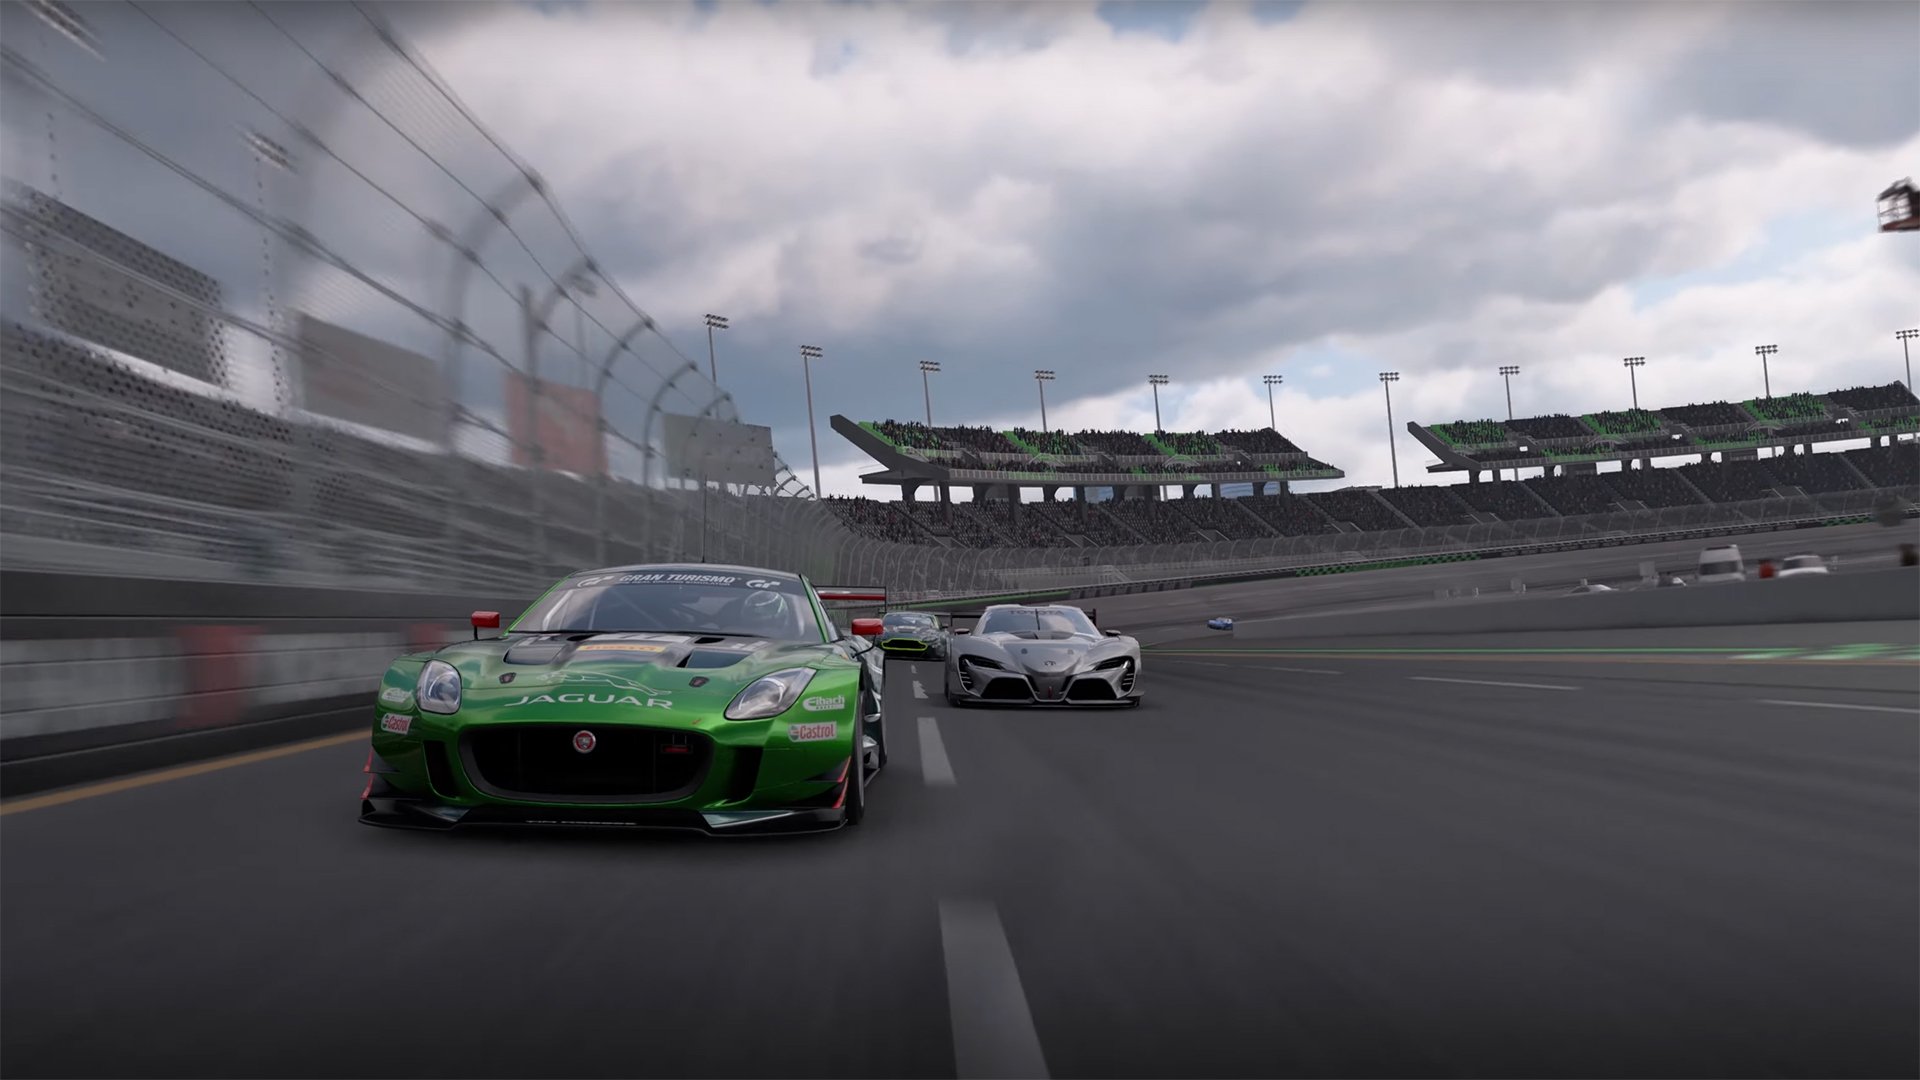 The strangest features in Gran Turismo history